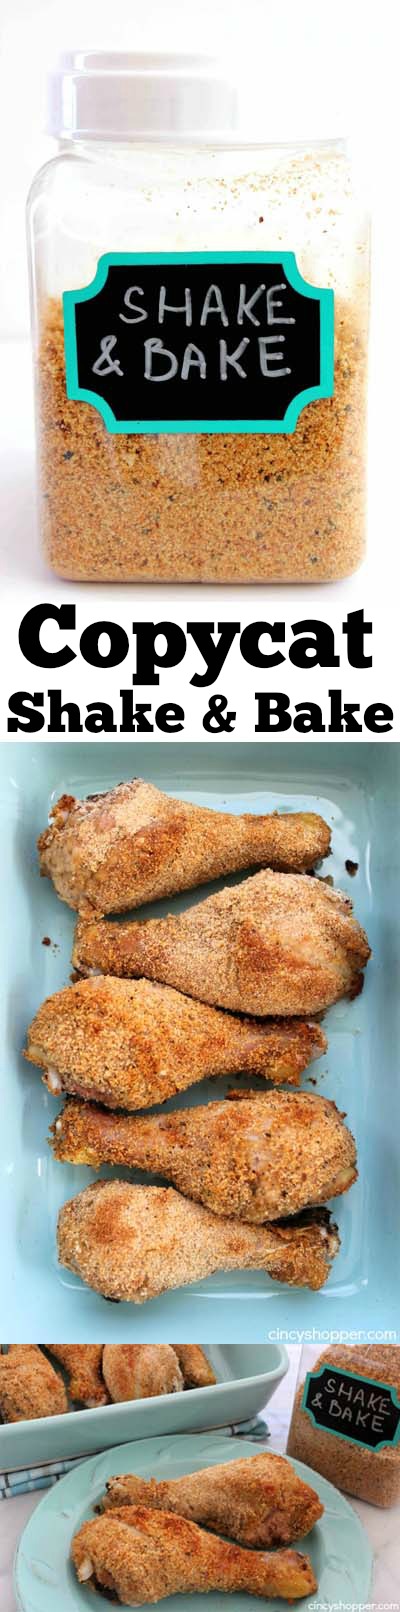 This CopyCat Shake 'N Bake Recipe is going to save you some $$'s. Season your pork or chicken with this do it yourself recipe for a fraction of the cost of store bought